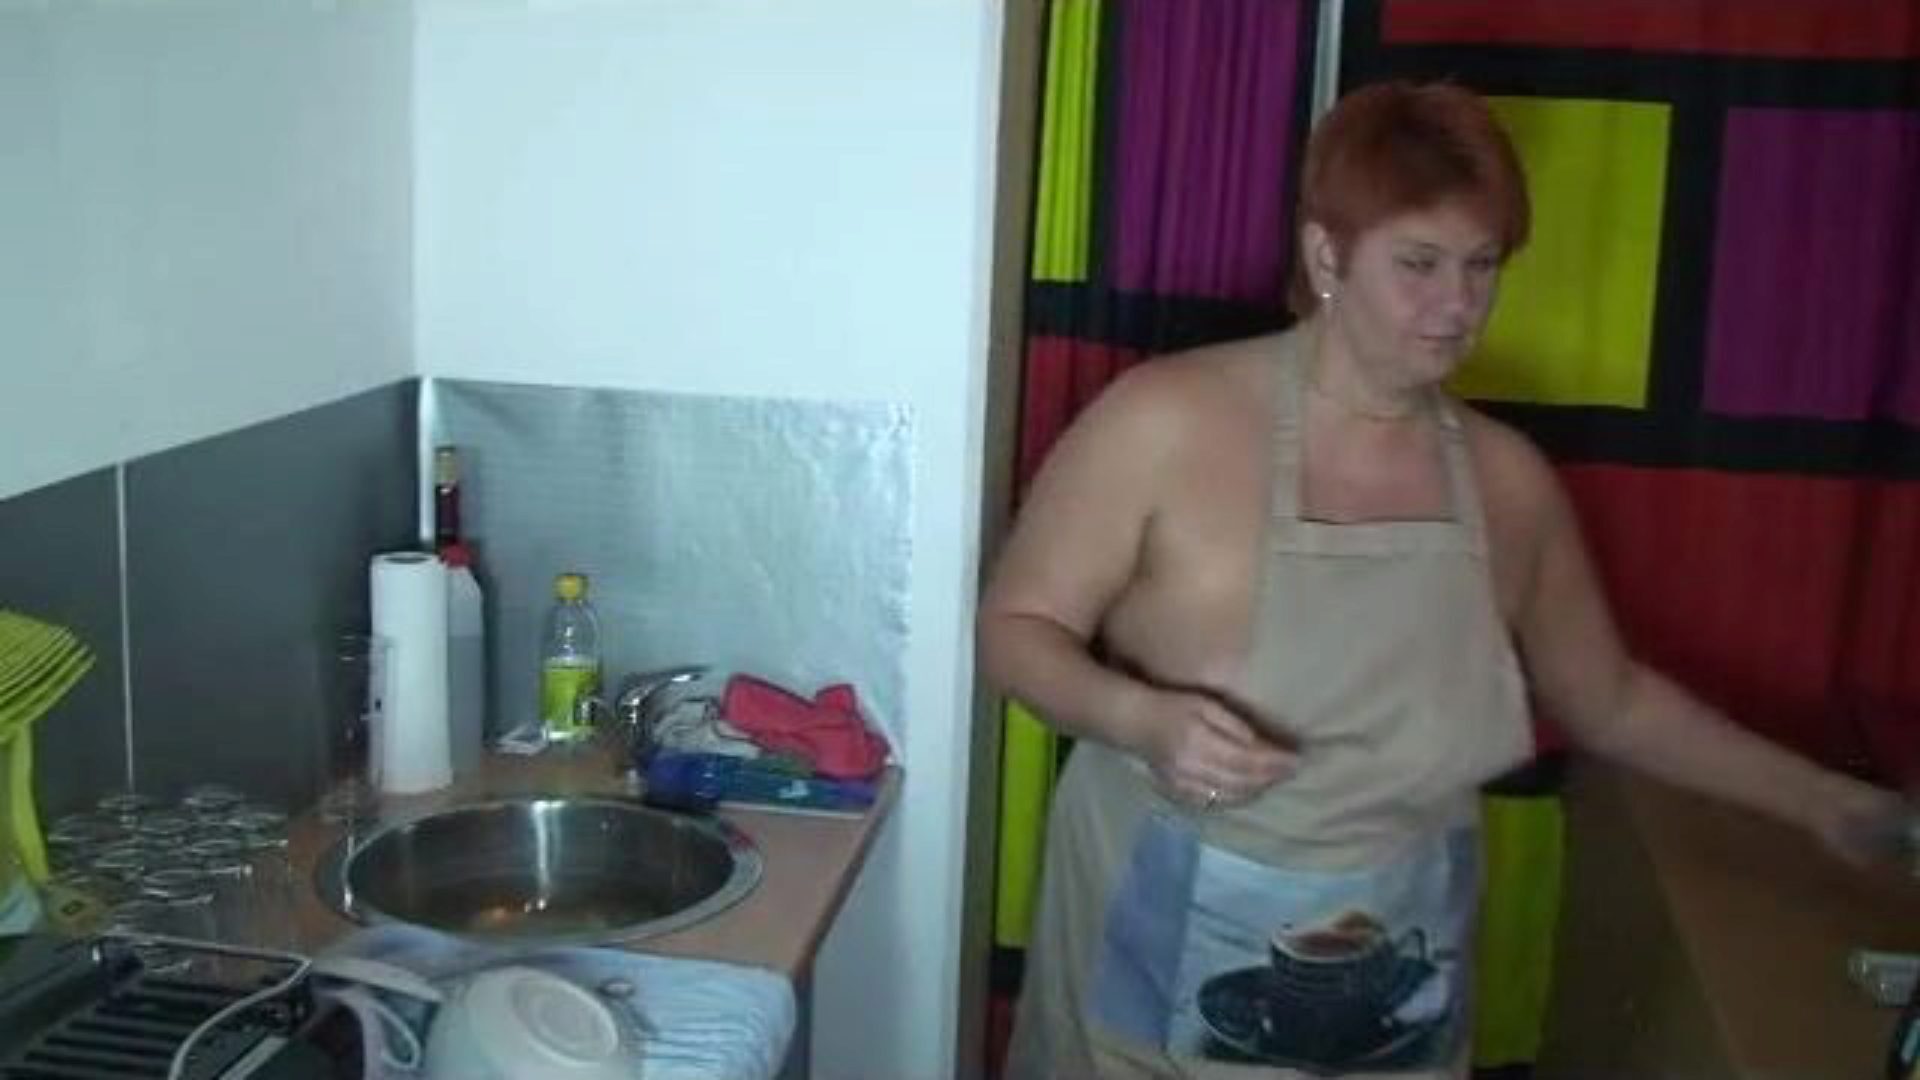 When washing dishes in the kitchen ... ... Anna from washing and wearing no thing more than an apron. When rinse is she so slutty that that babe is even anxious with various kitchen utensils. With hawt closeups and original sound.